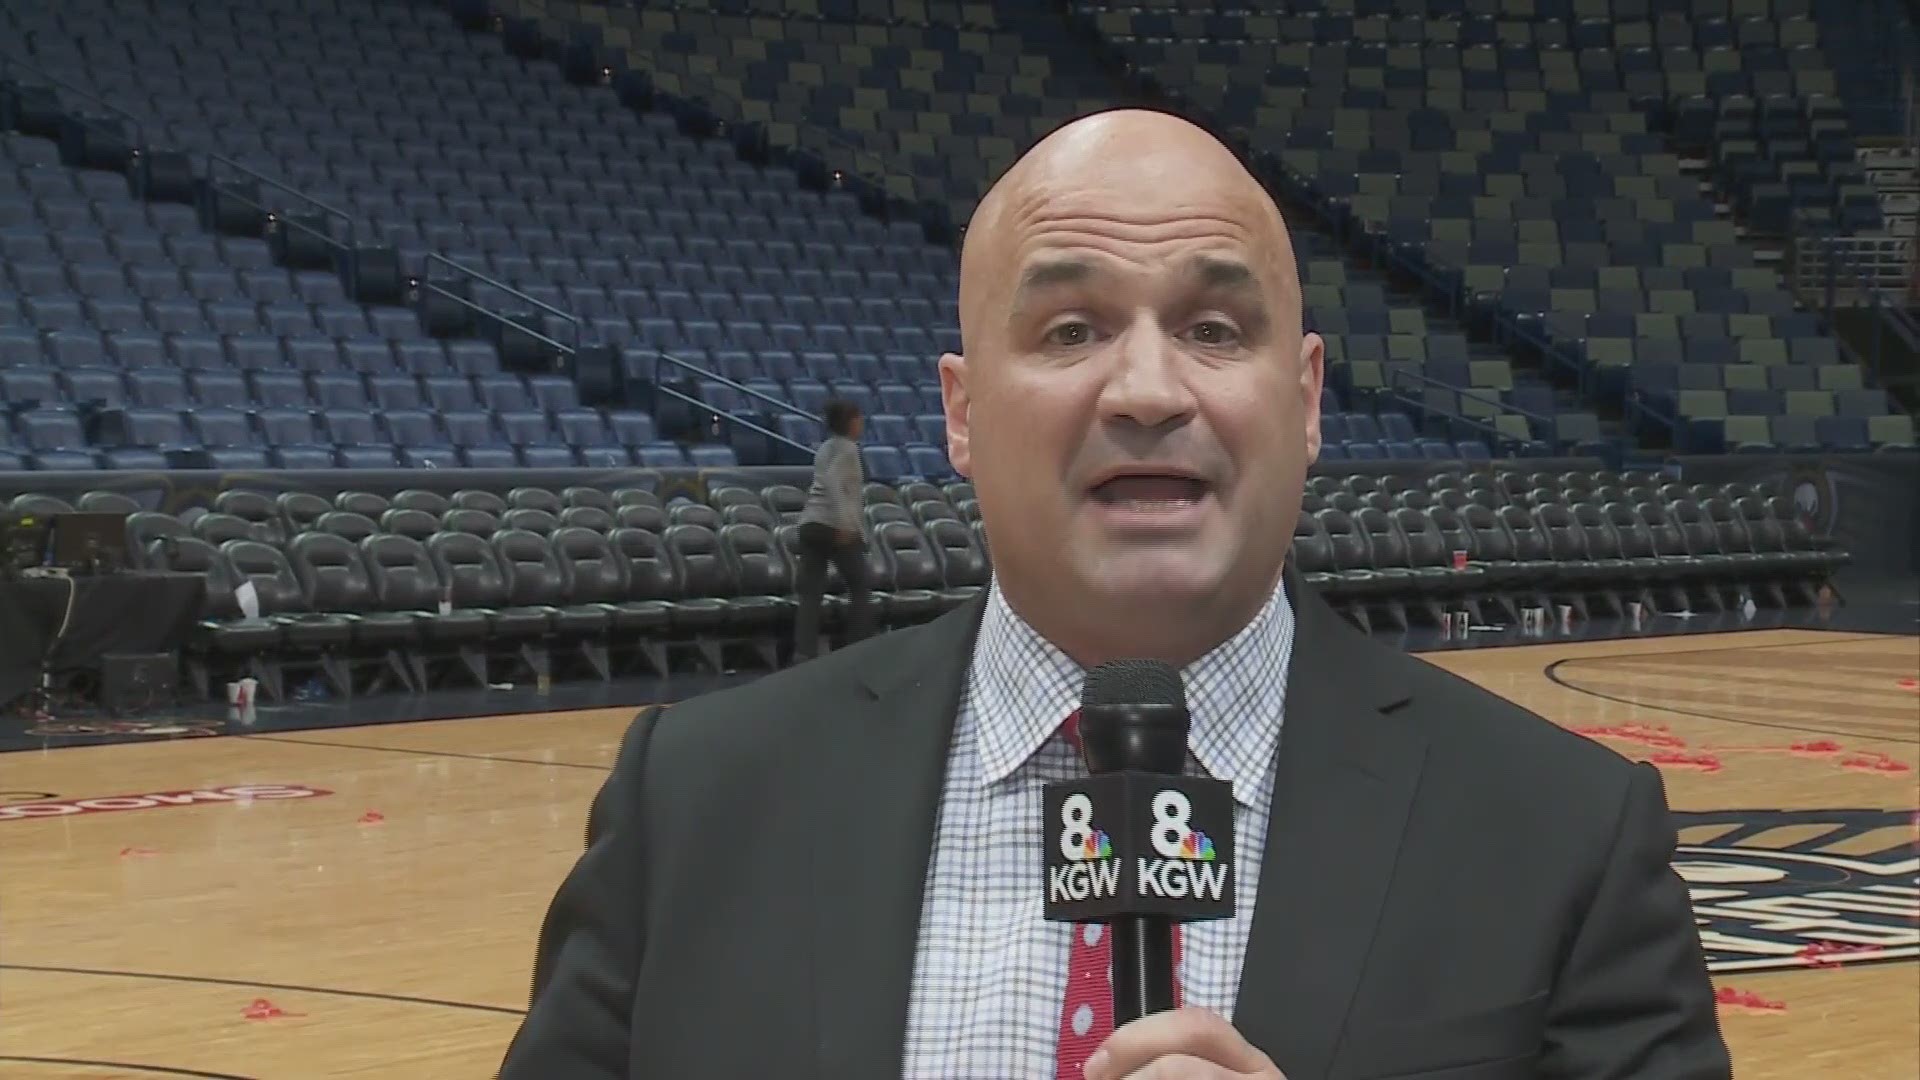 KGW sports commentator John Canzano reacts to the Portland Trail Blazers 119-102 loss to the New Orleans Pelicans in Game 3 of the first round series.